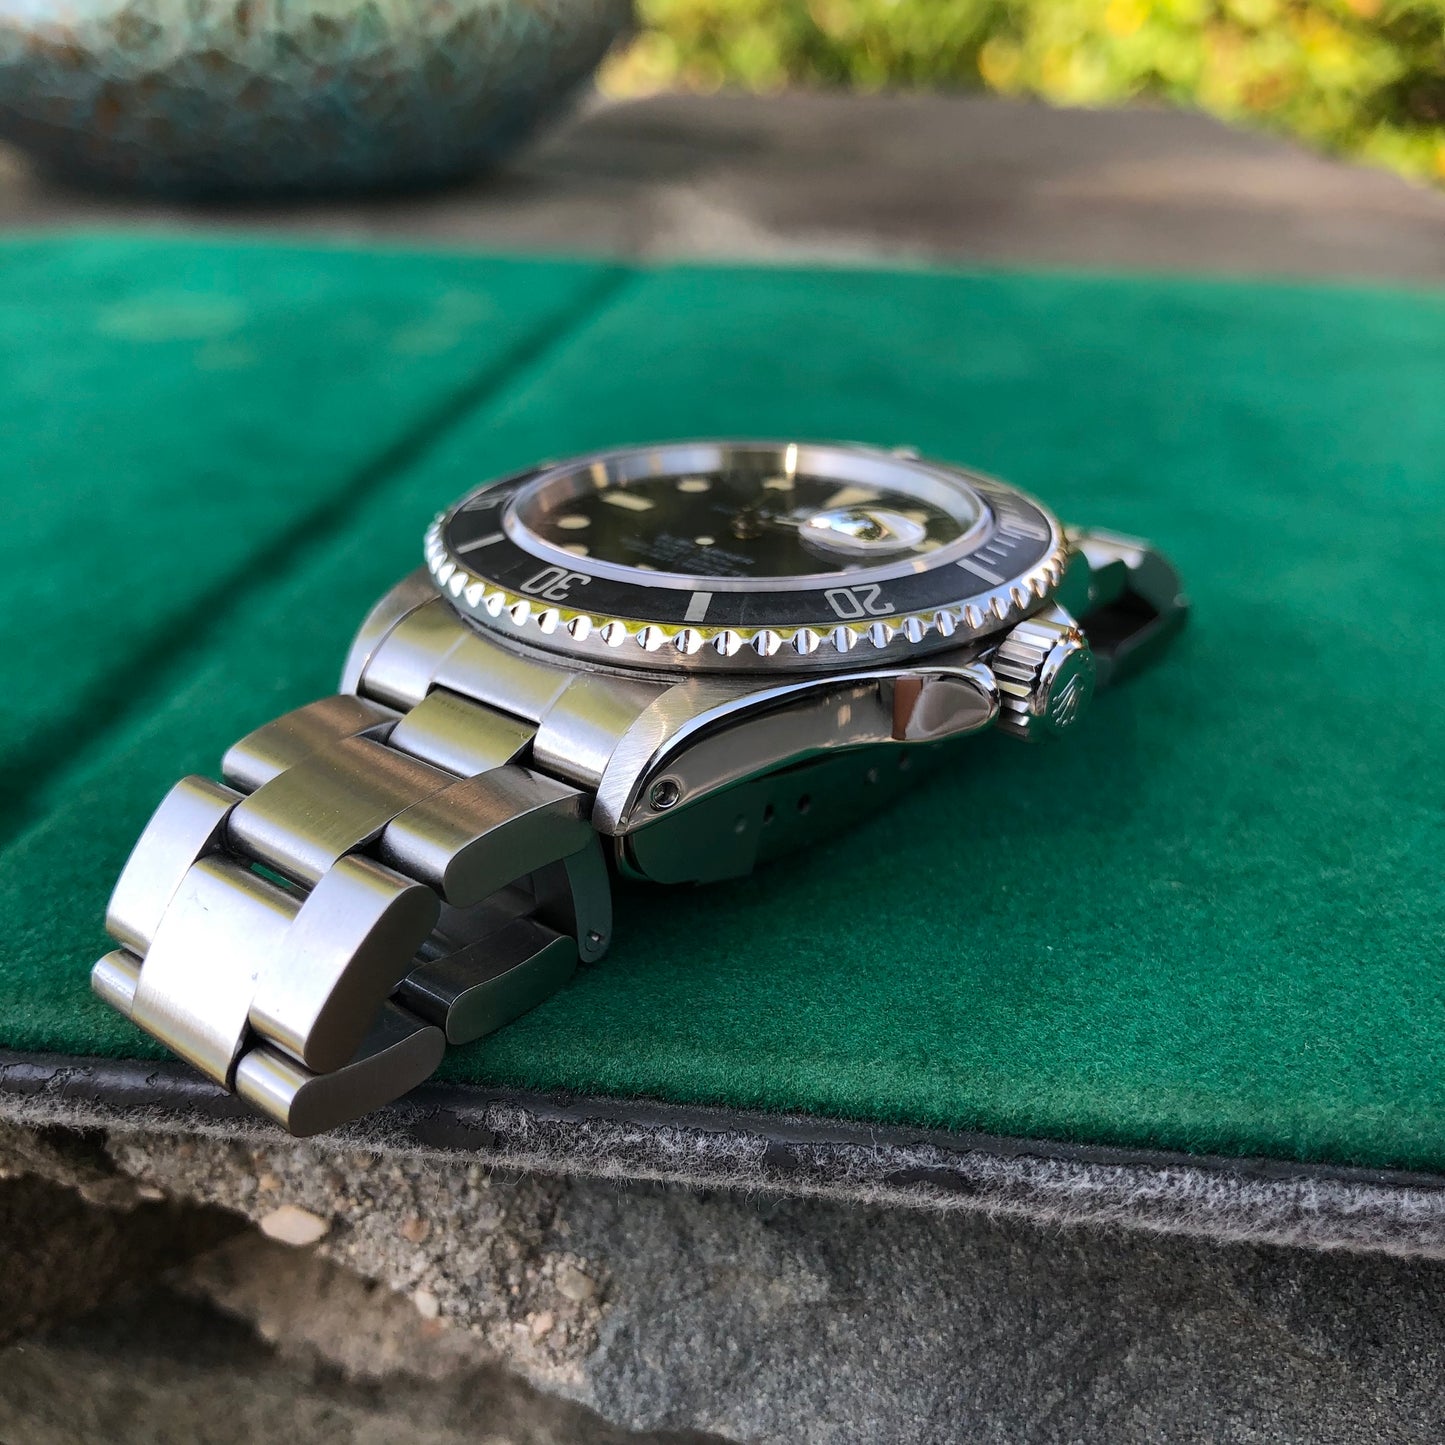 Vintage Rolex Submariner 16800 Matte Dial Sapphire Box Papers Circa 1982 - Hashtag Watch Company